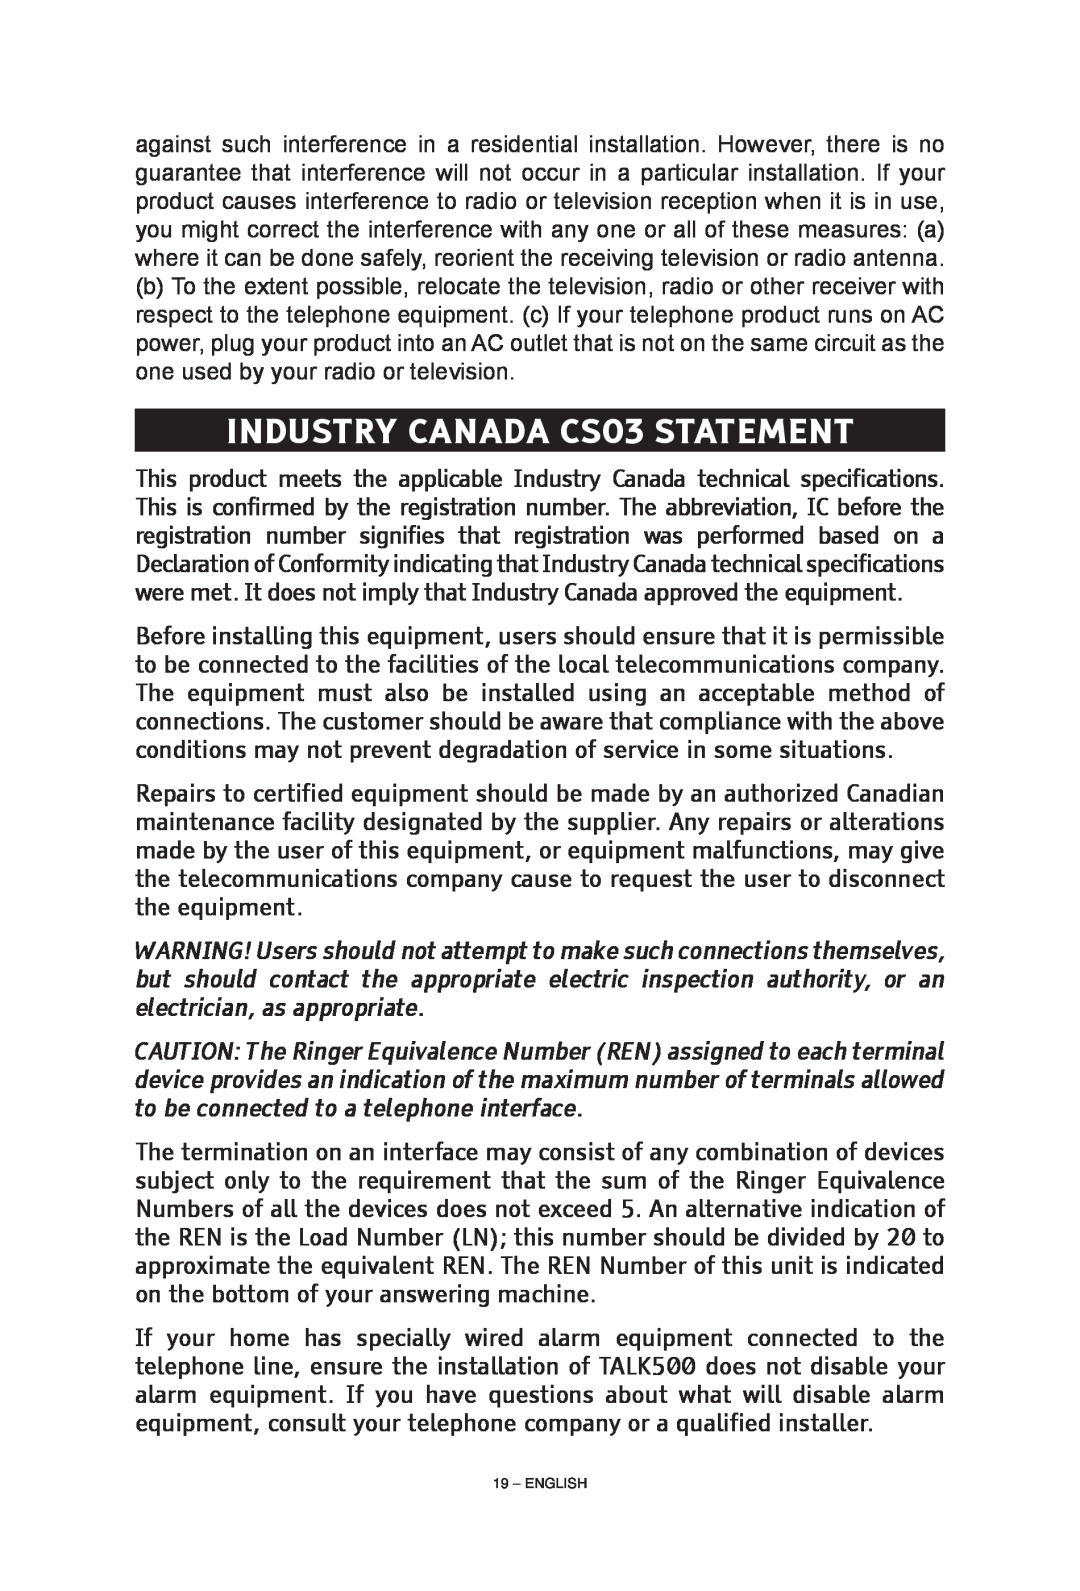 ClearSounds CS-A55 manual INDUSTRY CANADA CS03 STATEMENT, English 